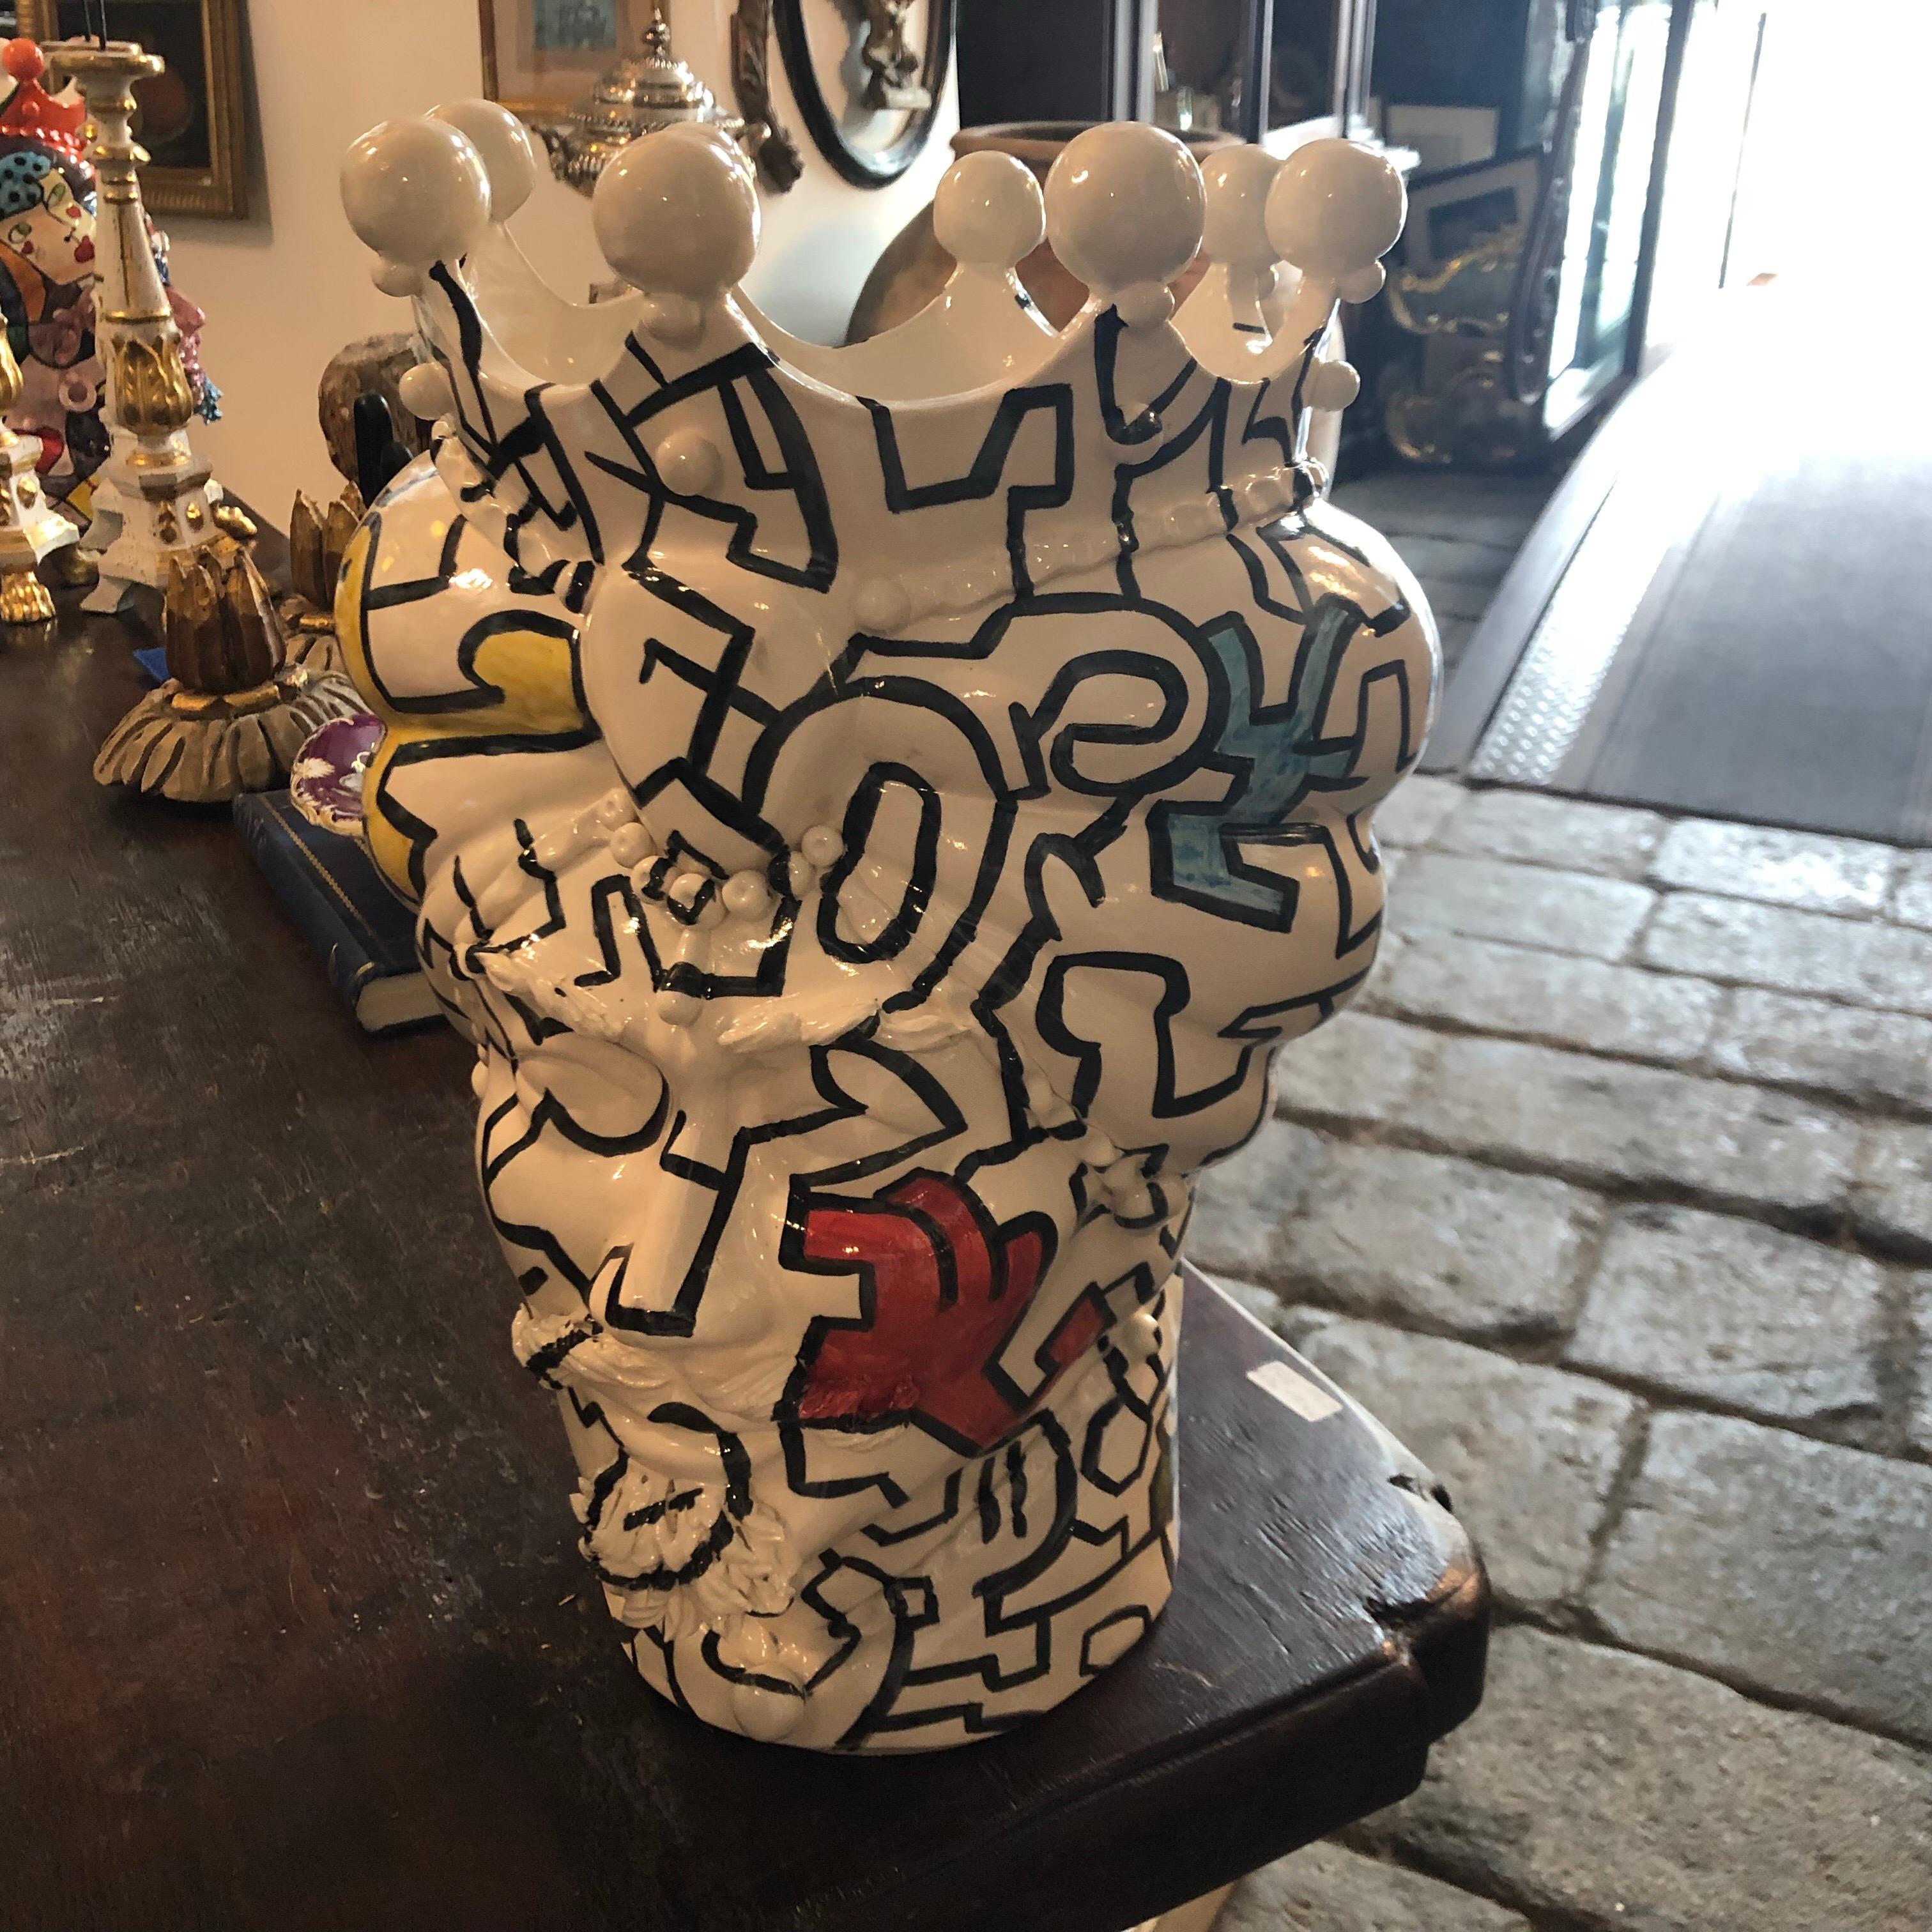 It's an amazing pair of white clay Sicilian Moro's head vases, interpreted in a Pop Art style by a Sicilian painter and signed 1/1 MR on the base. There are no copies of these, they are uniques pieces. The legend of the Sicilian Moro's heads speaks